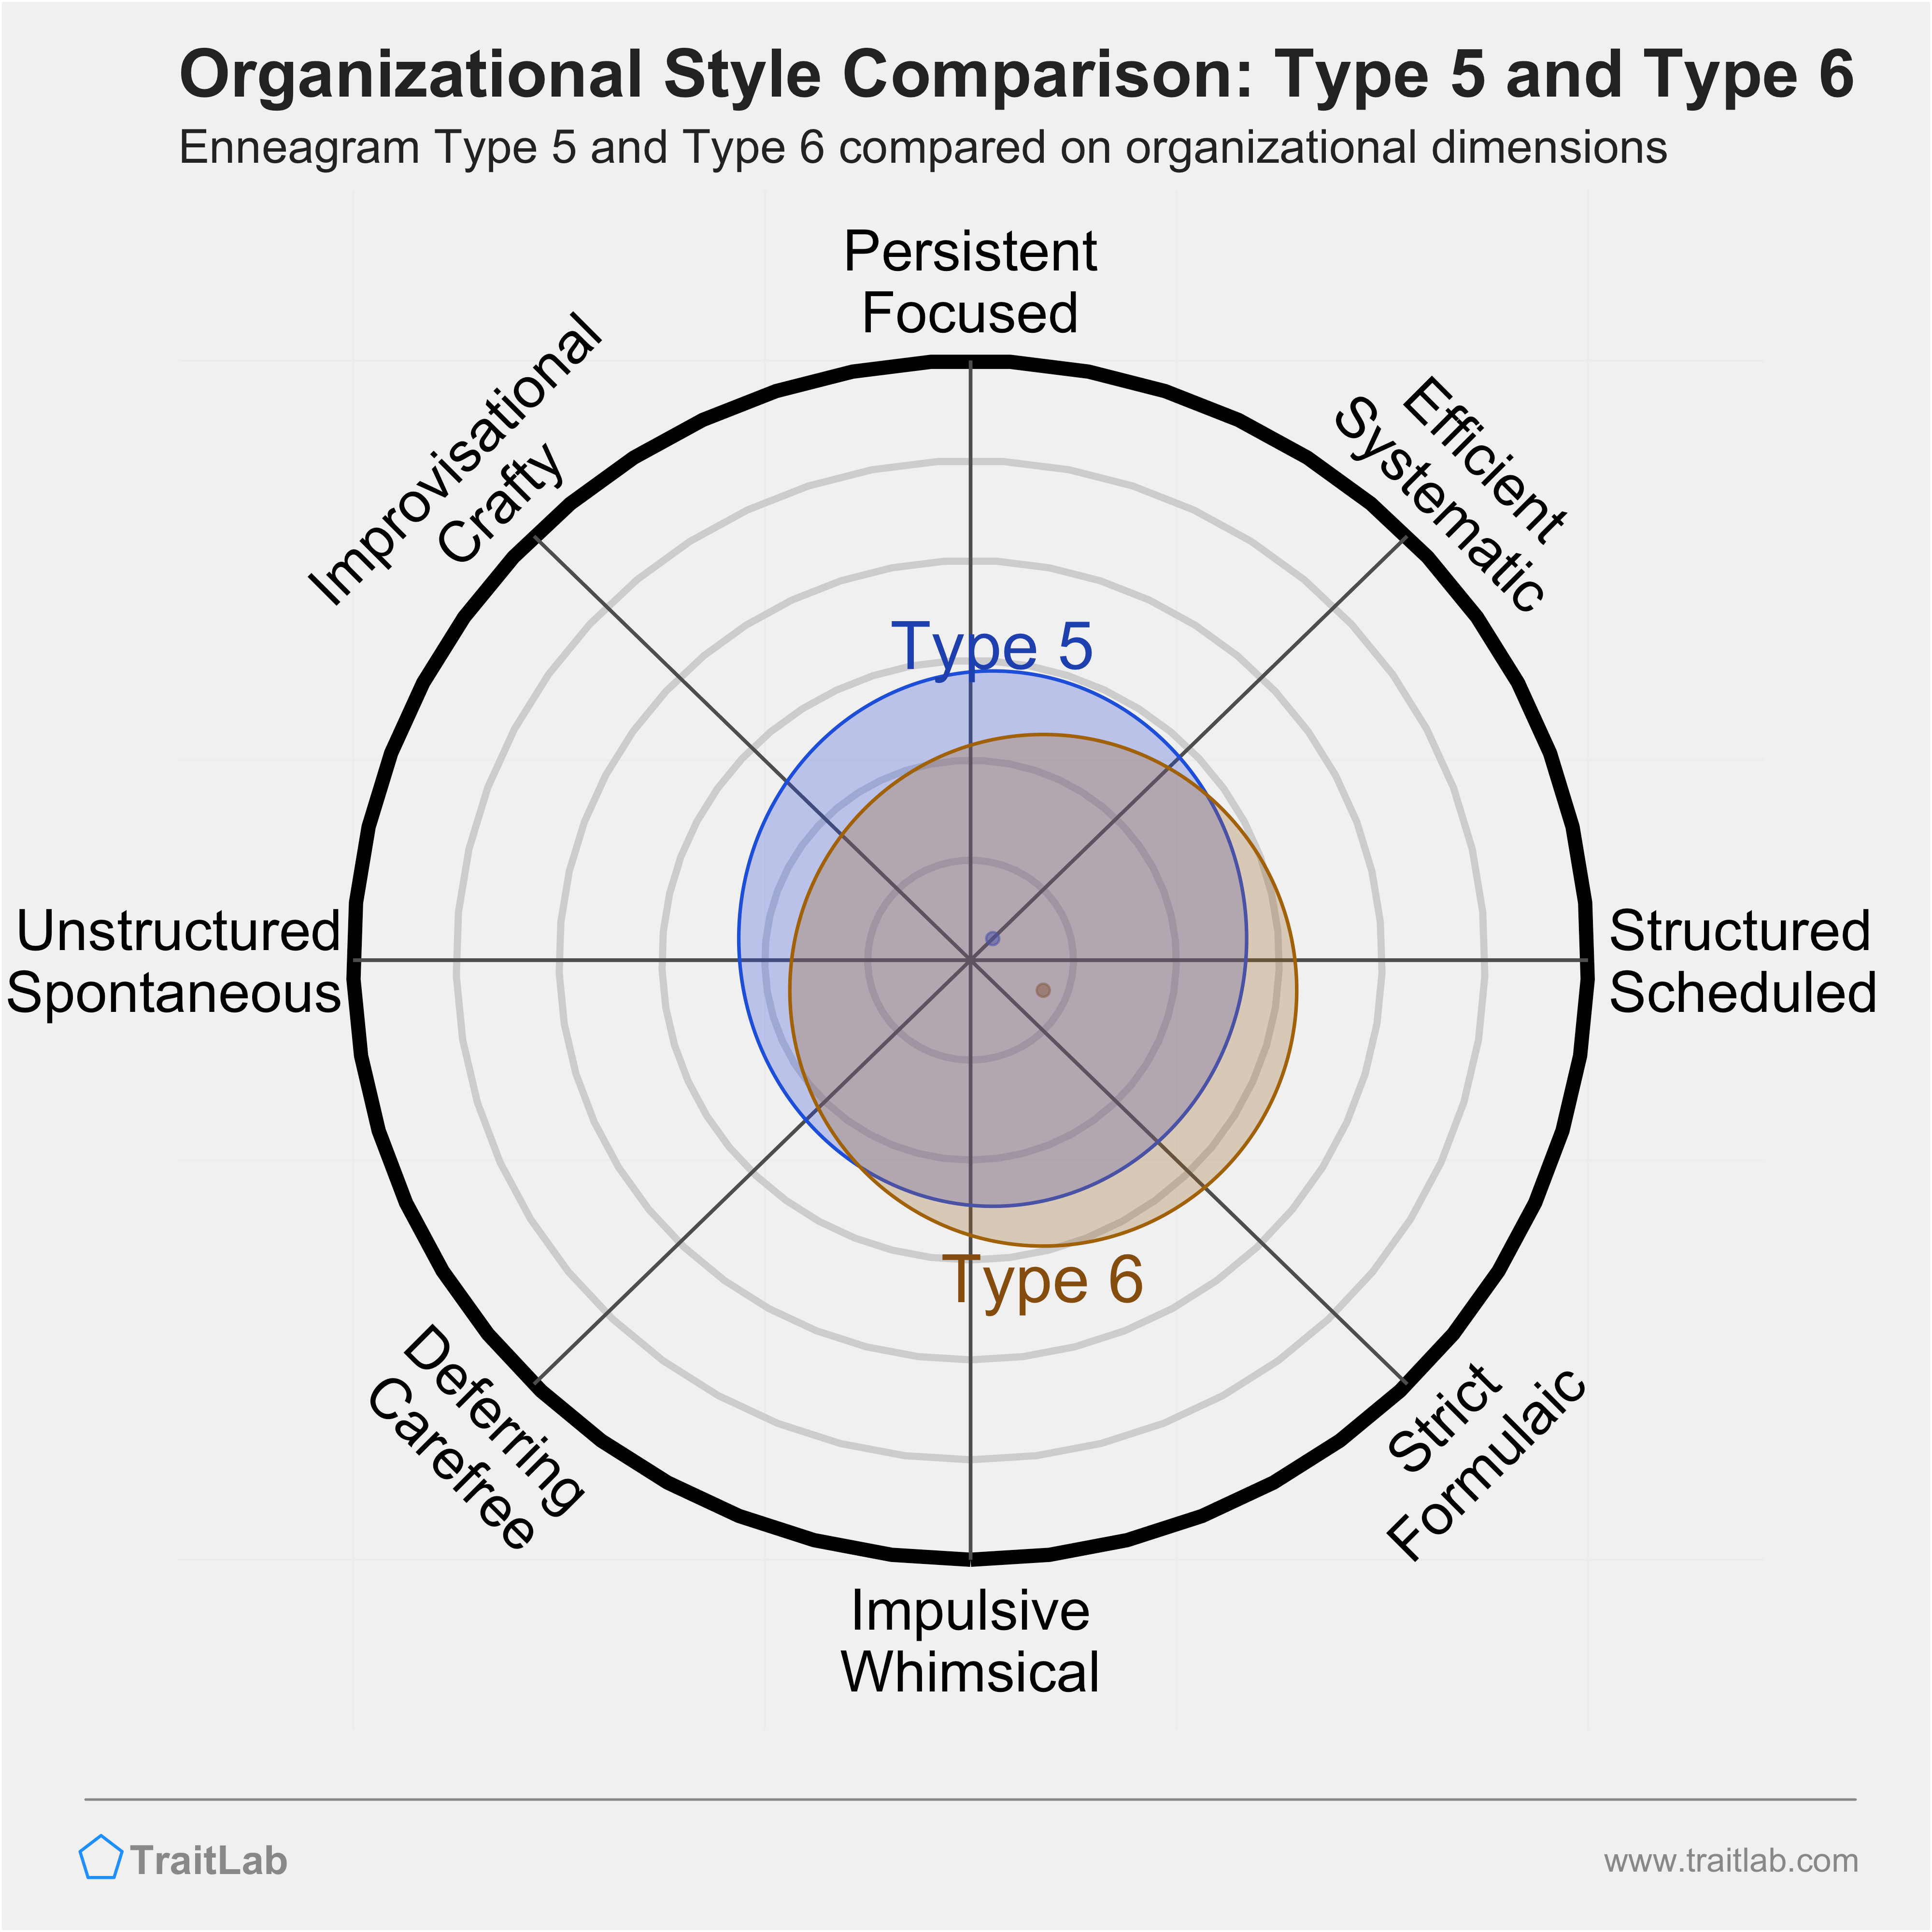 Type 5 and Type 6 comparison across organizational dimensions